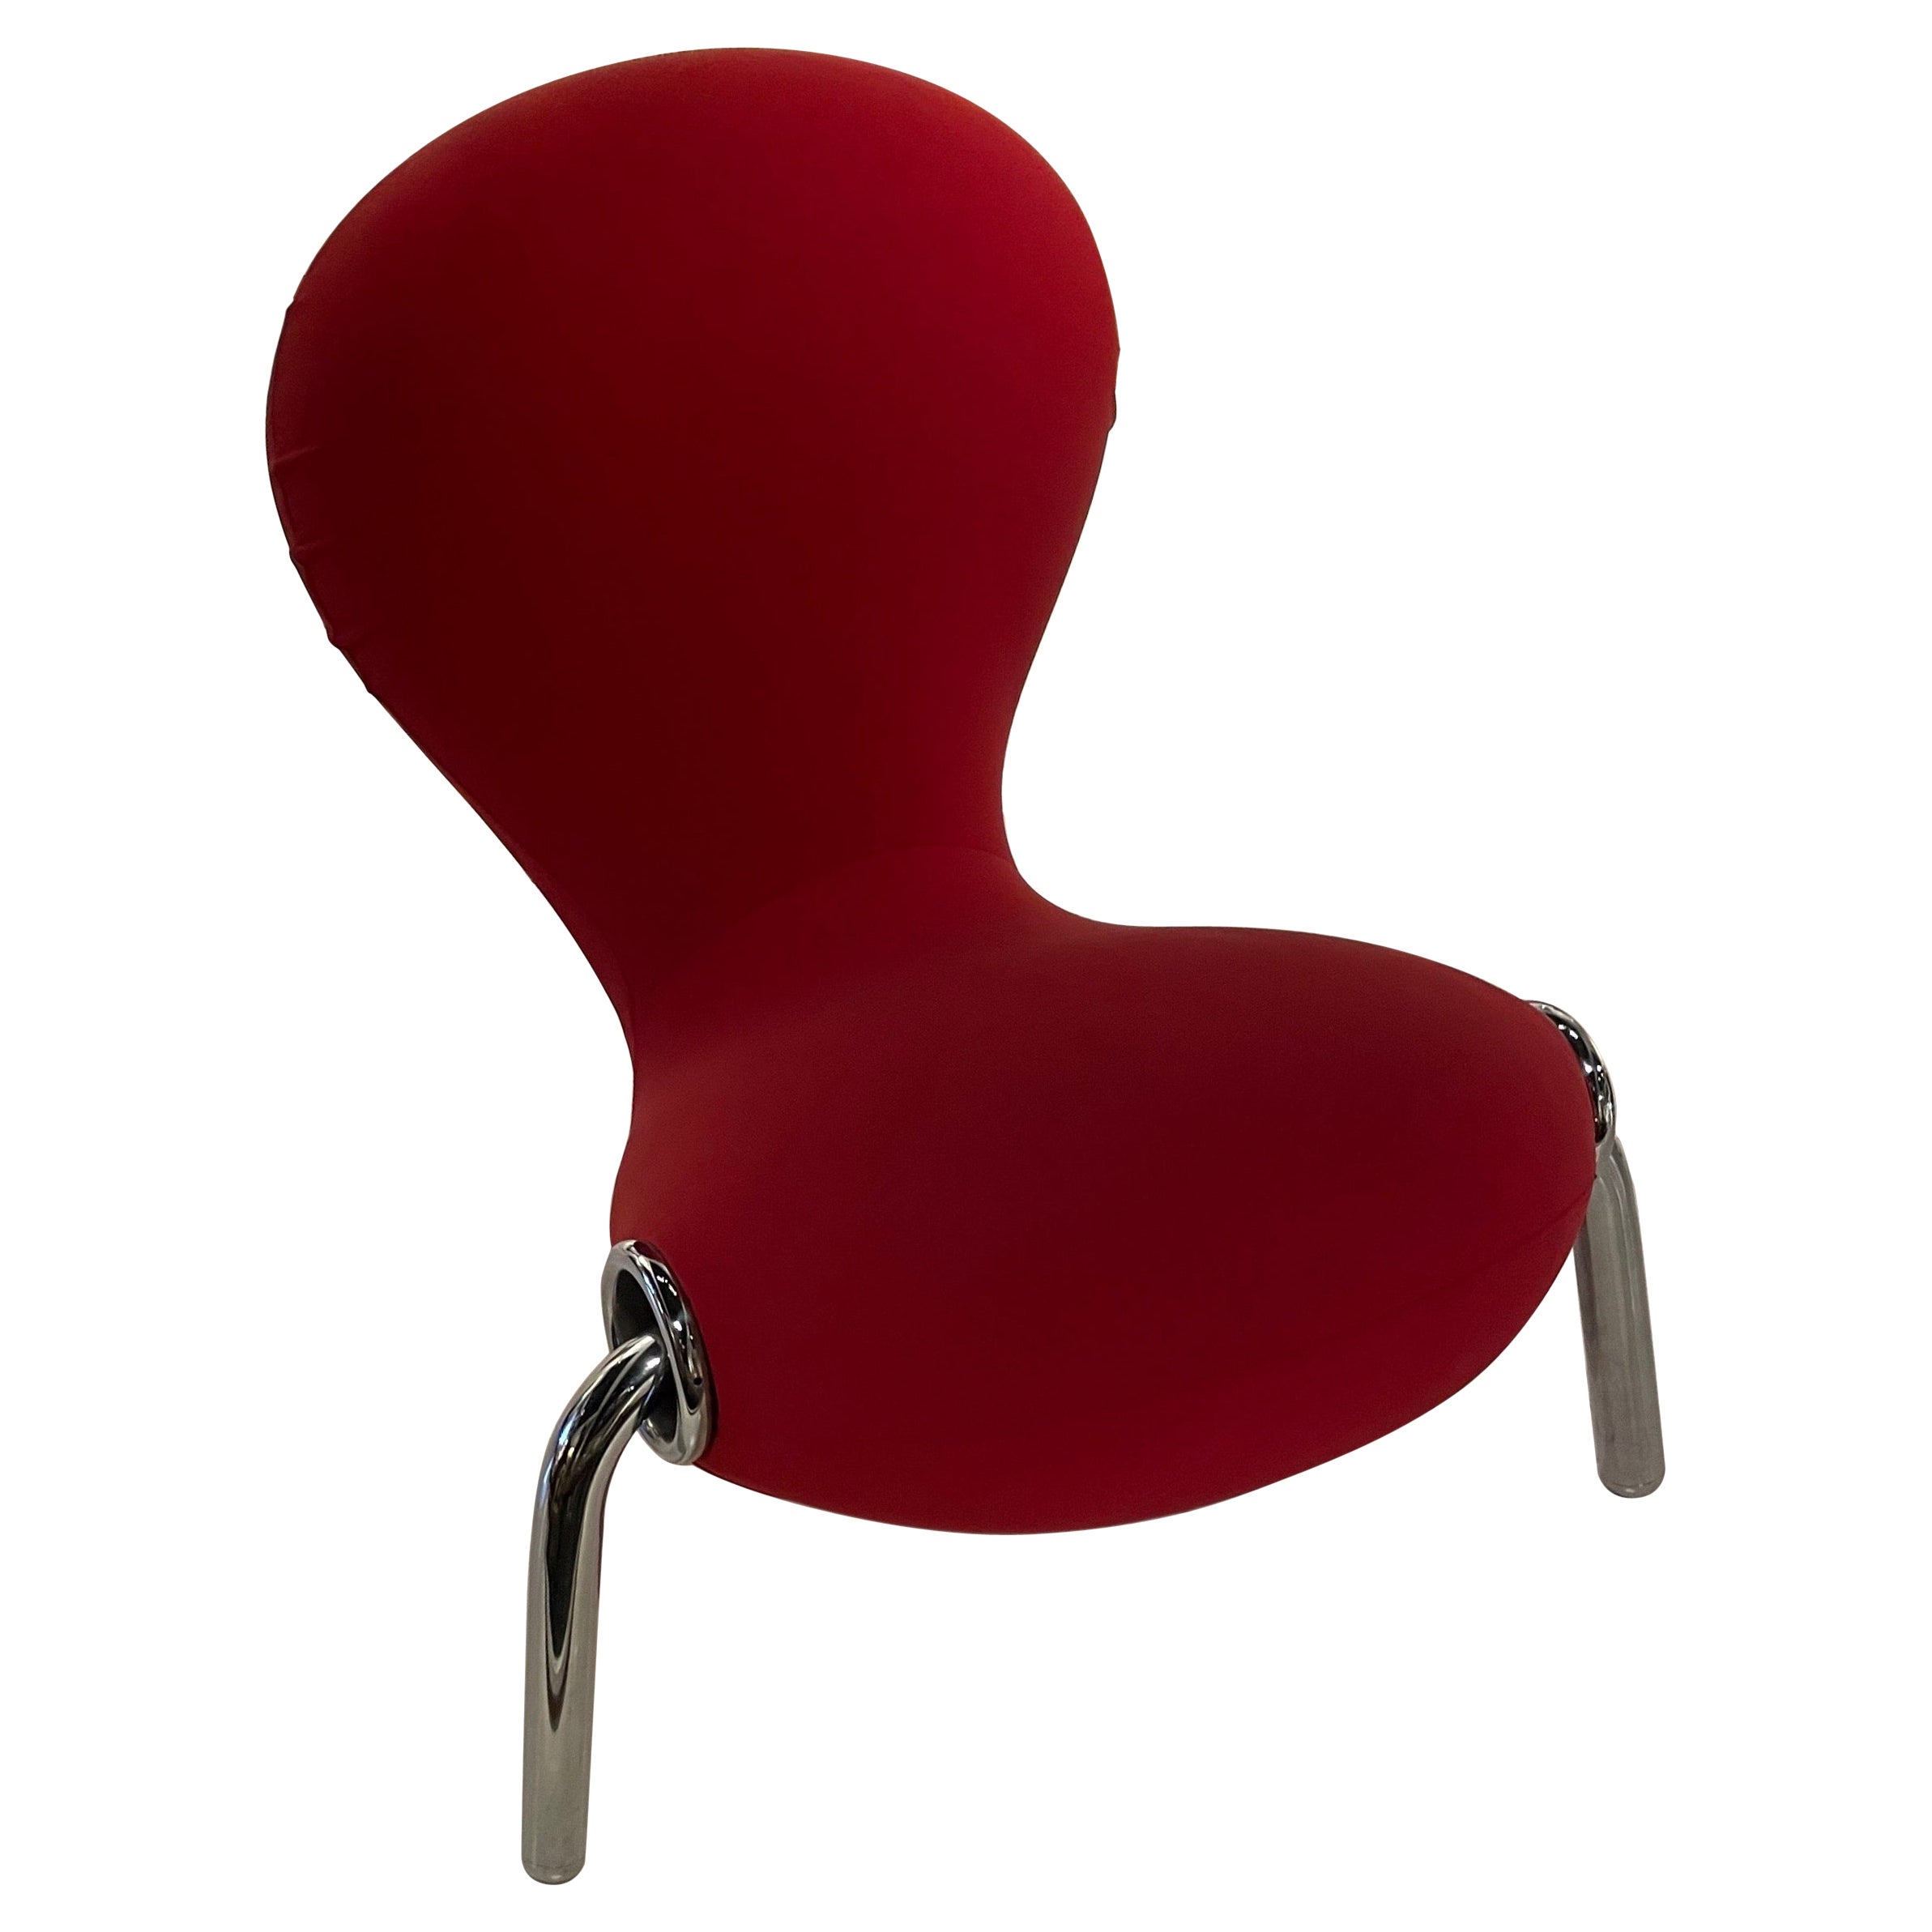 Iconic Space Age Red Embryo Chair by Marc Newson For Sale